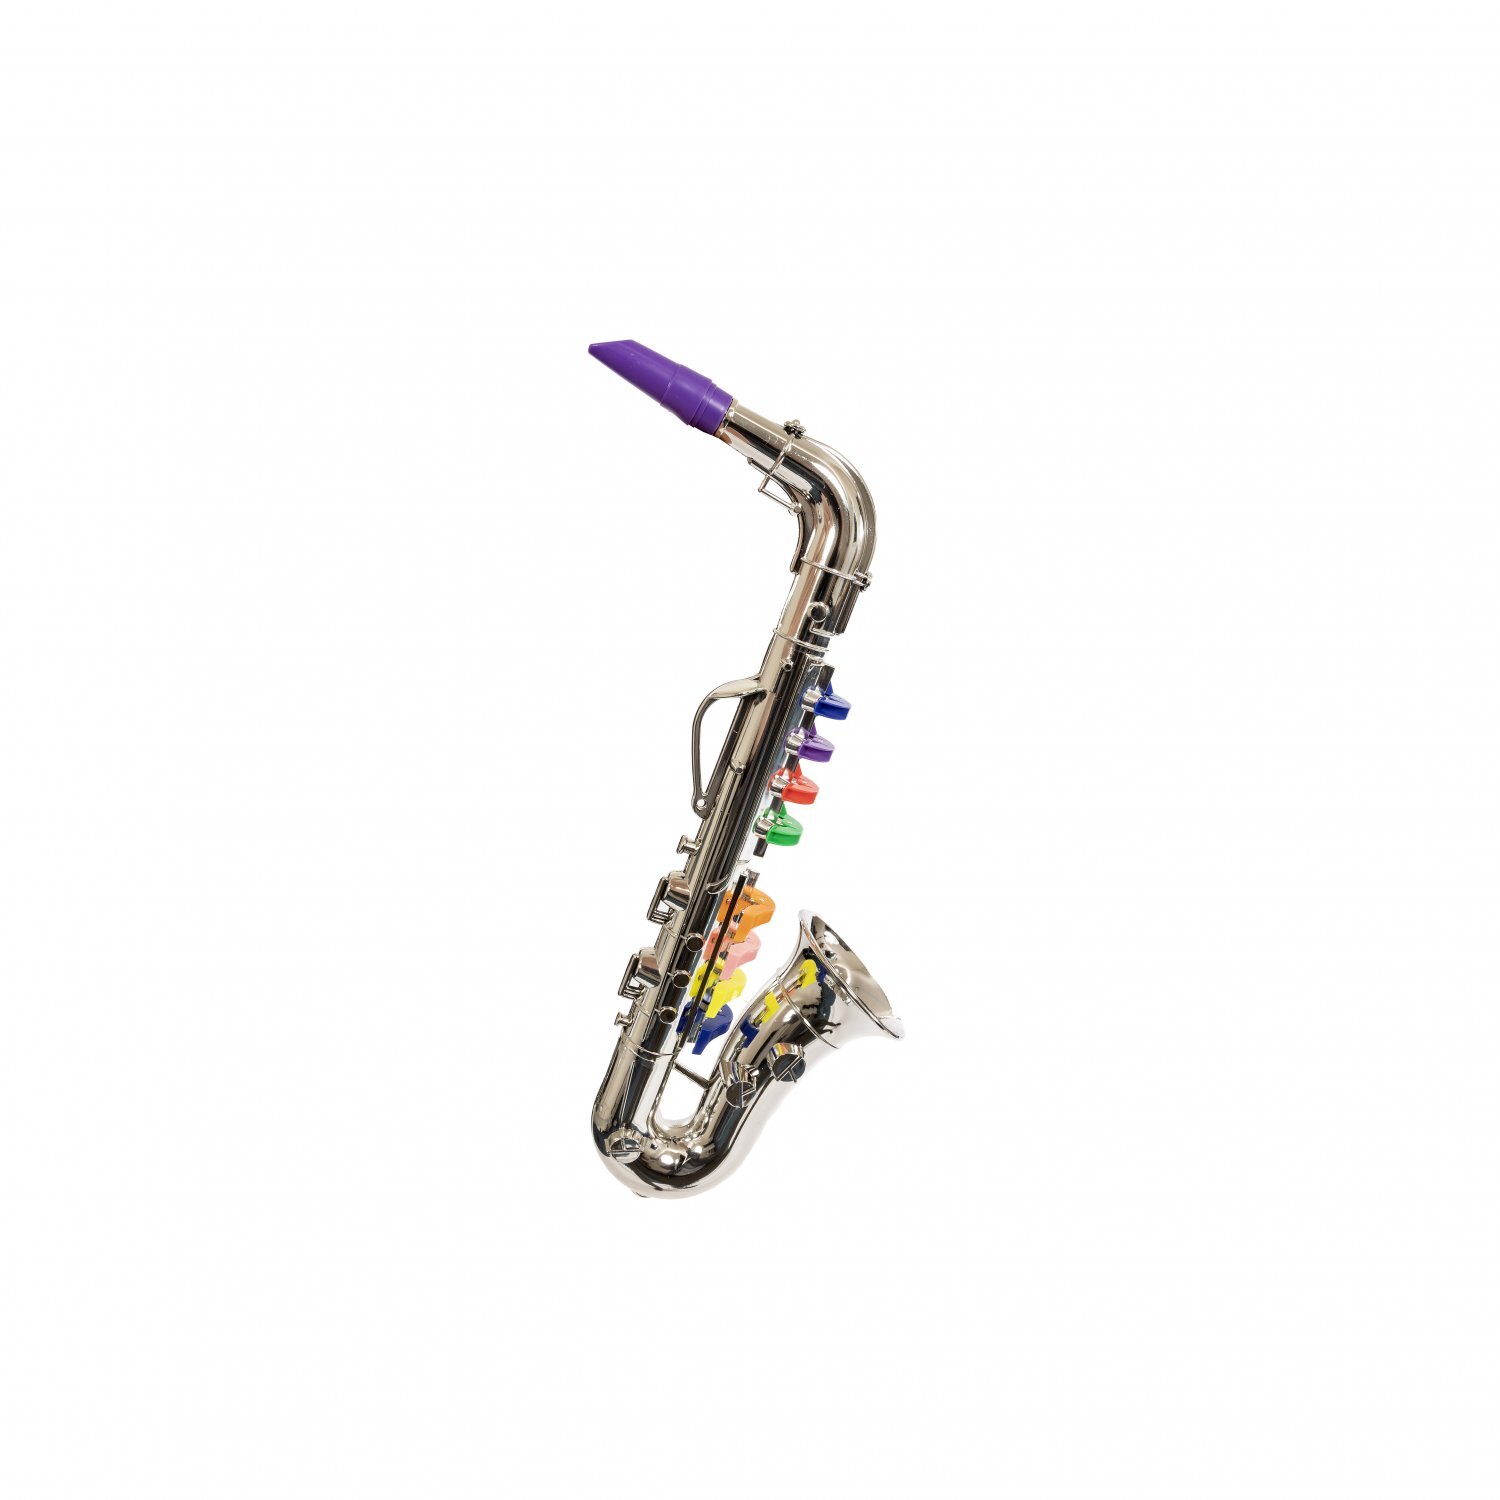 Kids ChildrenS Metal Plated Saxophone Musical Instrument Music Toys Play Fun 